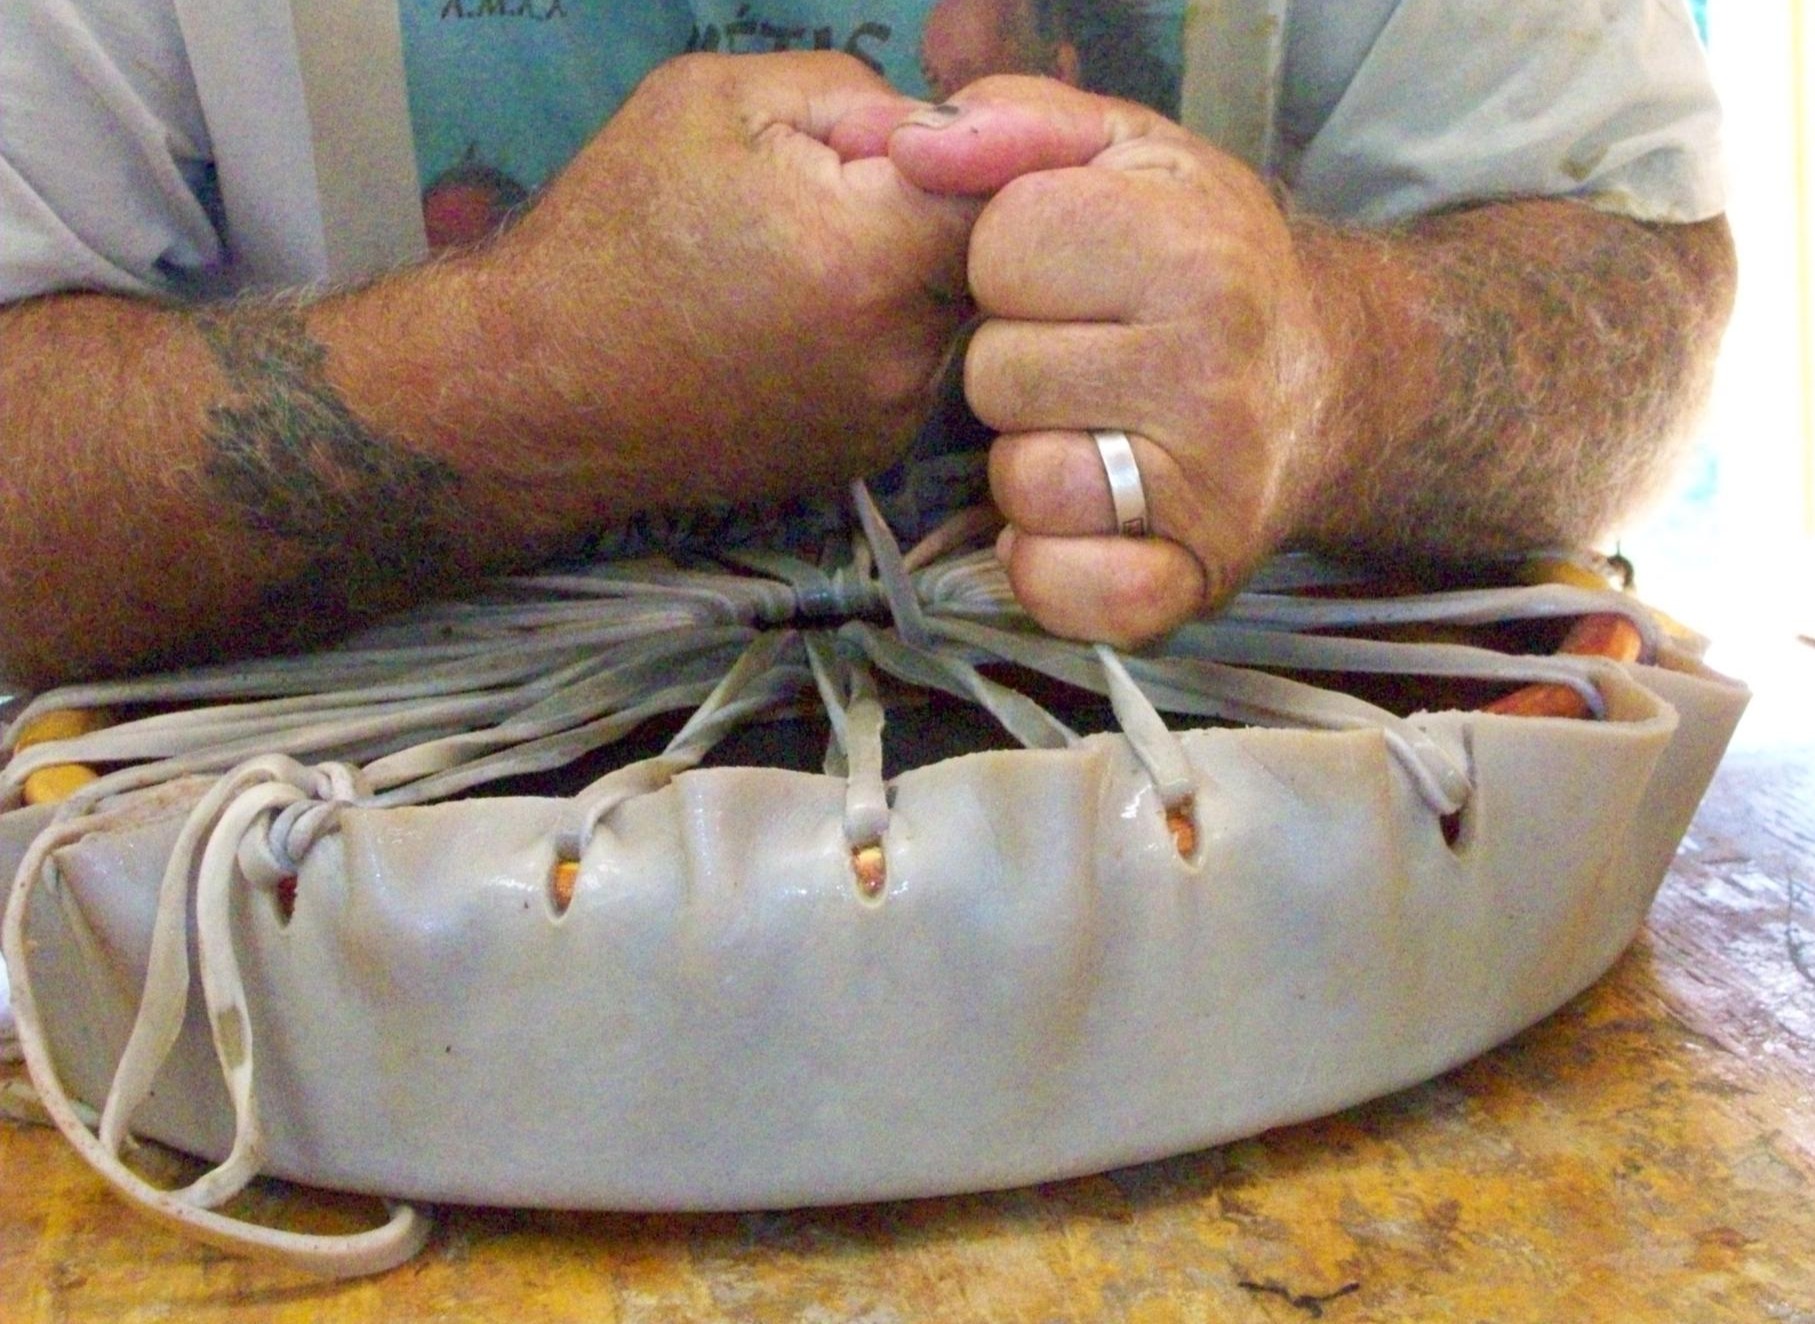 Keith Little Badger tightens Rawhide Heads on Native American Hand Drums